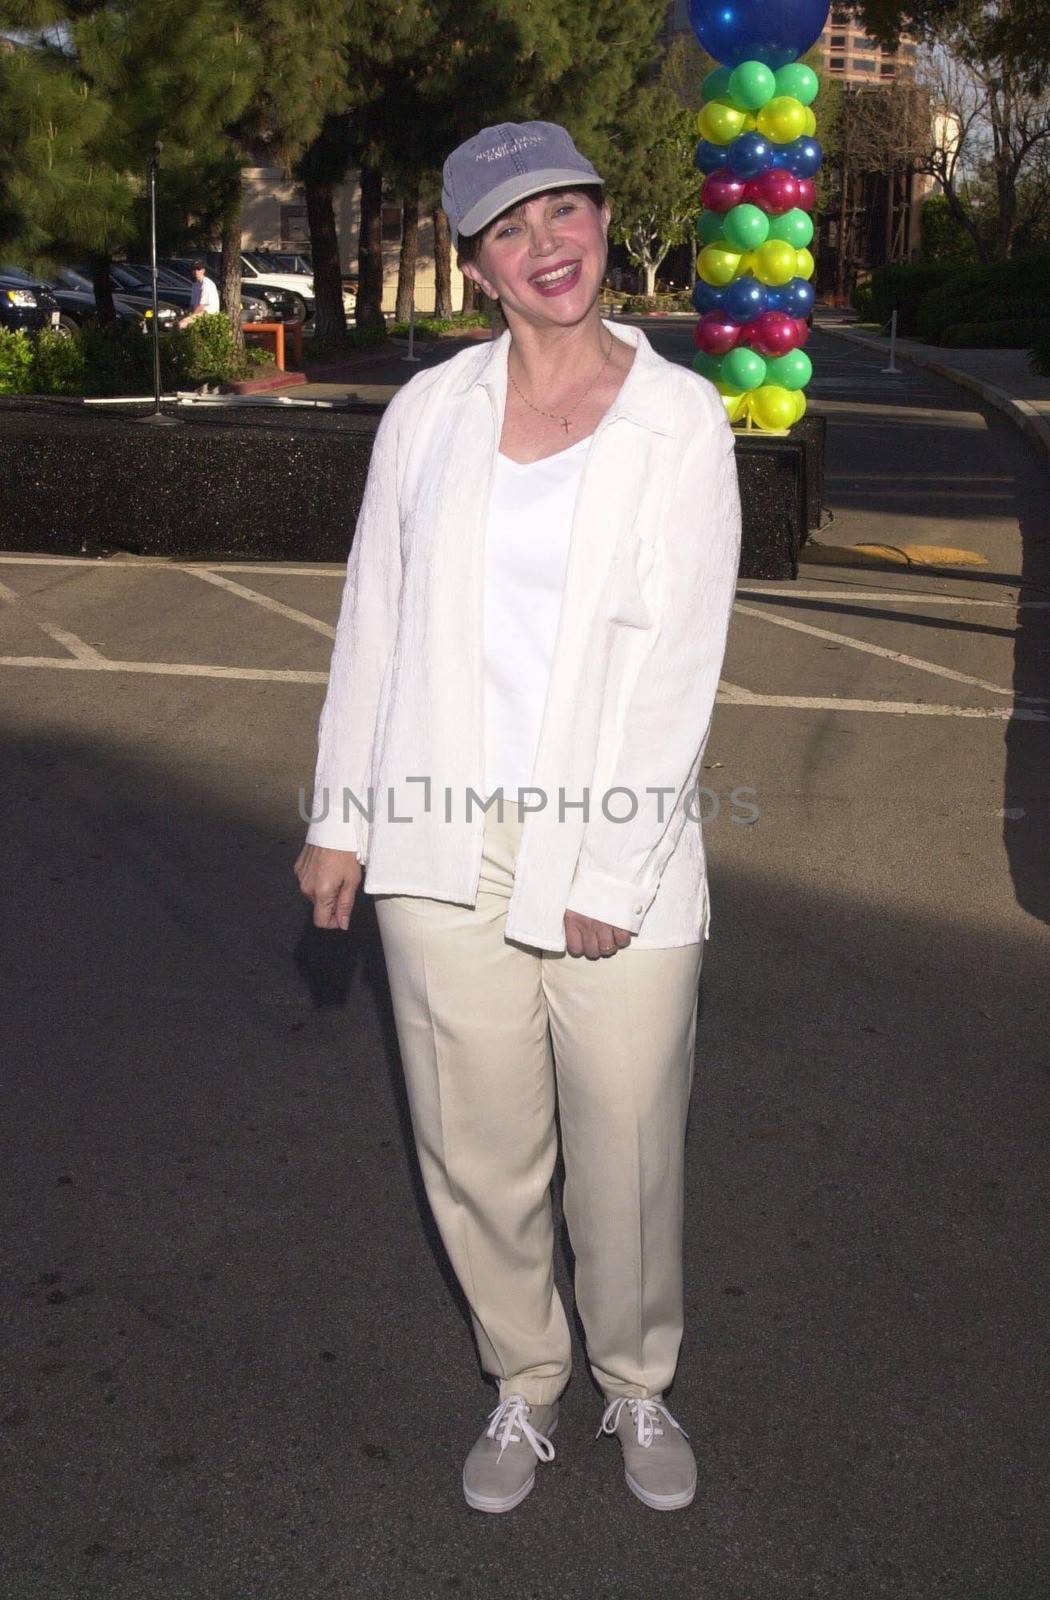 Cindy Marshall at the MS Walk 2000, where the cast of "Laverne and Shirley" reunited. Burbank, 04-09-00